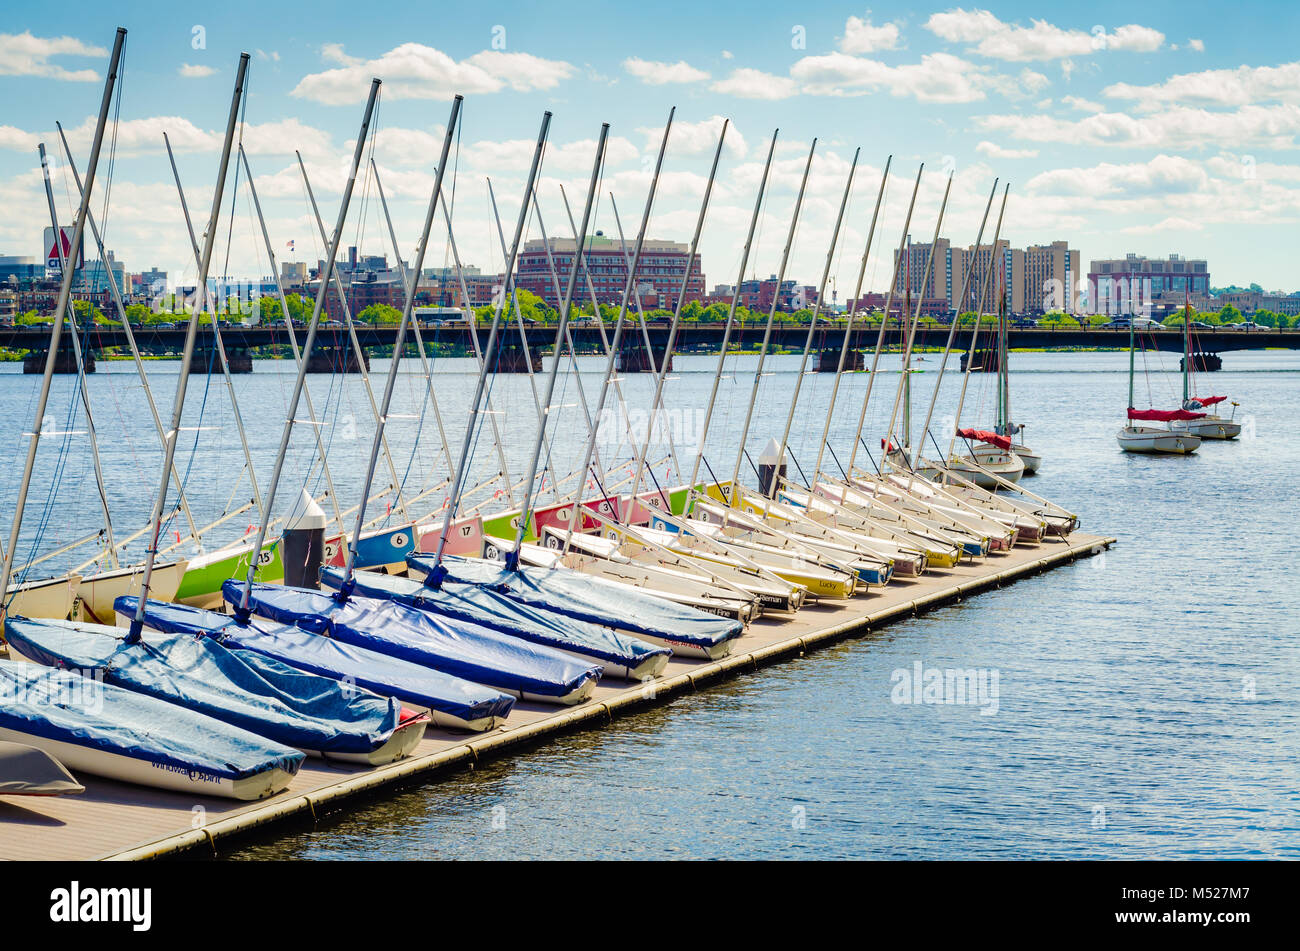 Since 1935, the MIT sailing pavilion has been where thousands in the Boston area have learned and perfected sailing and racing on the Charles River. Stock Photo